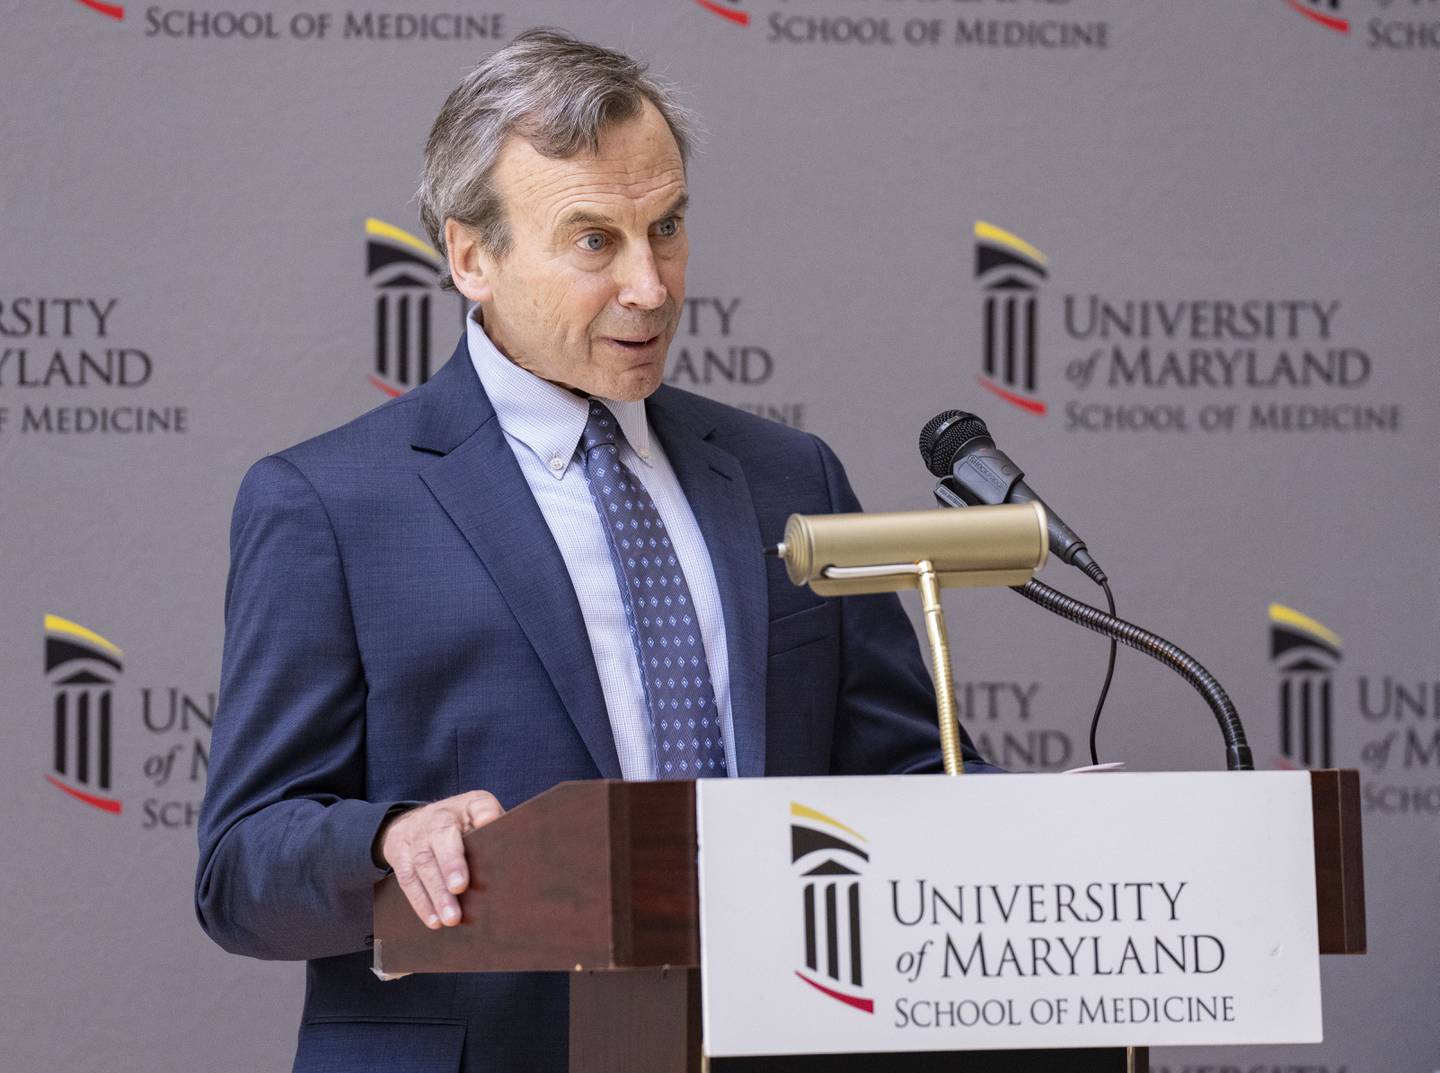 Eric Weintraub, MD, Associate Director, Kahlert Institute for Addiction Medicine, speaks during a press conference for the University of Maryland School of Medicine that is opening Kahlert Institute for Addiction Medicine, Wednesday, May 31, 2023.